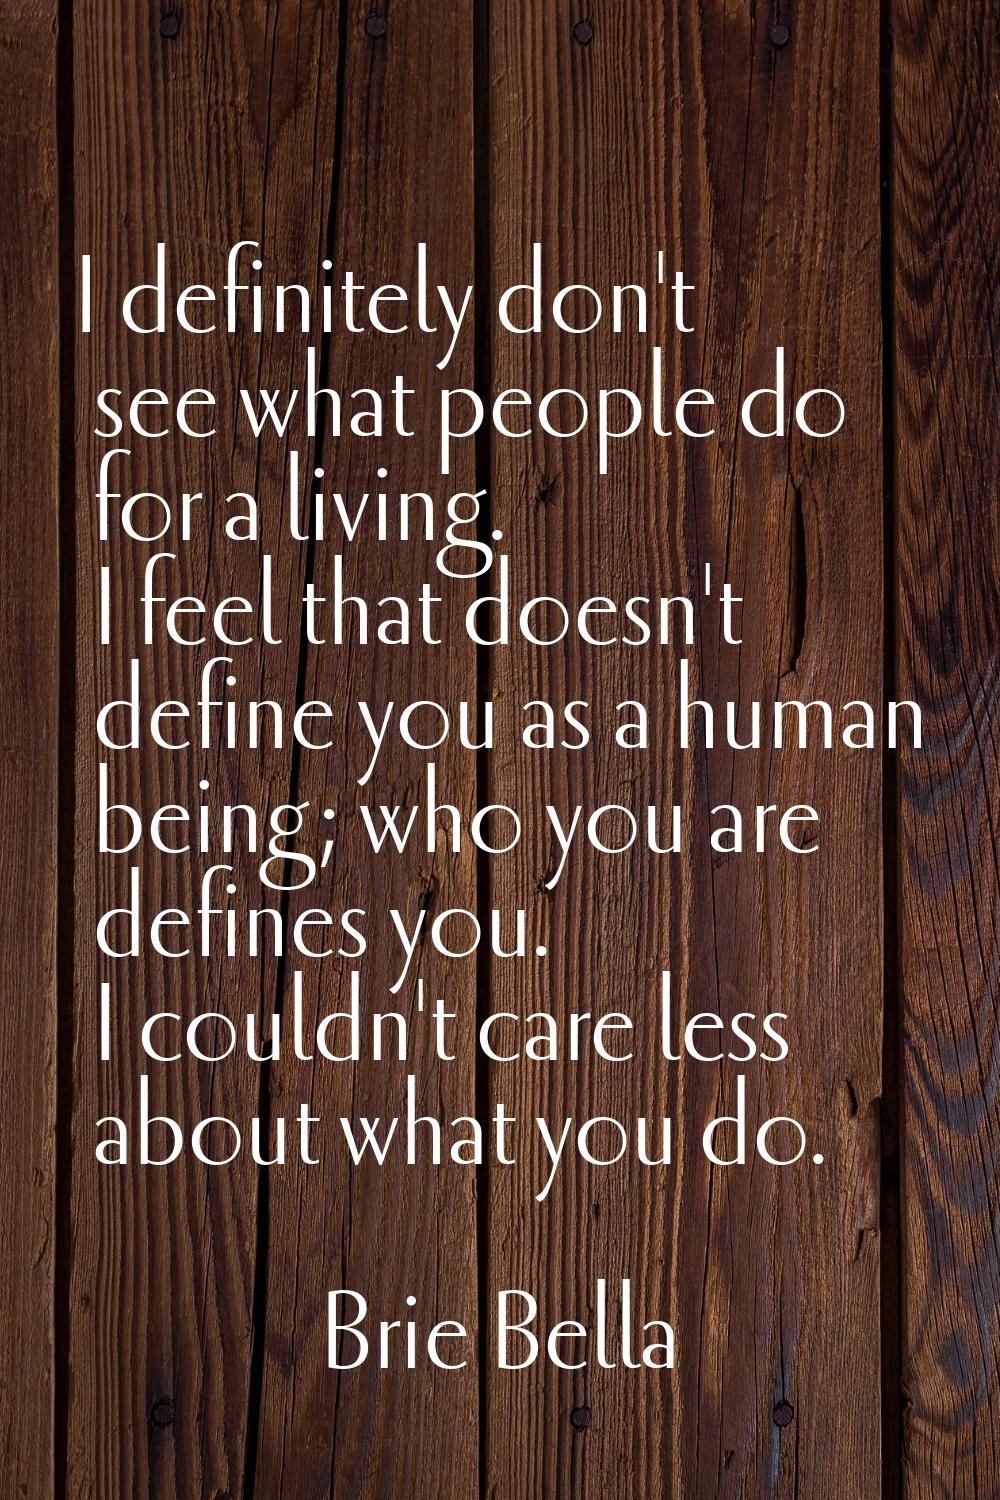 I definitely don't see what people do for a living. I feel that doesn't define you as a human being